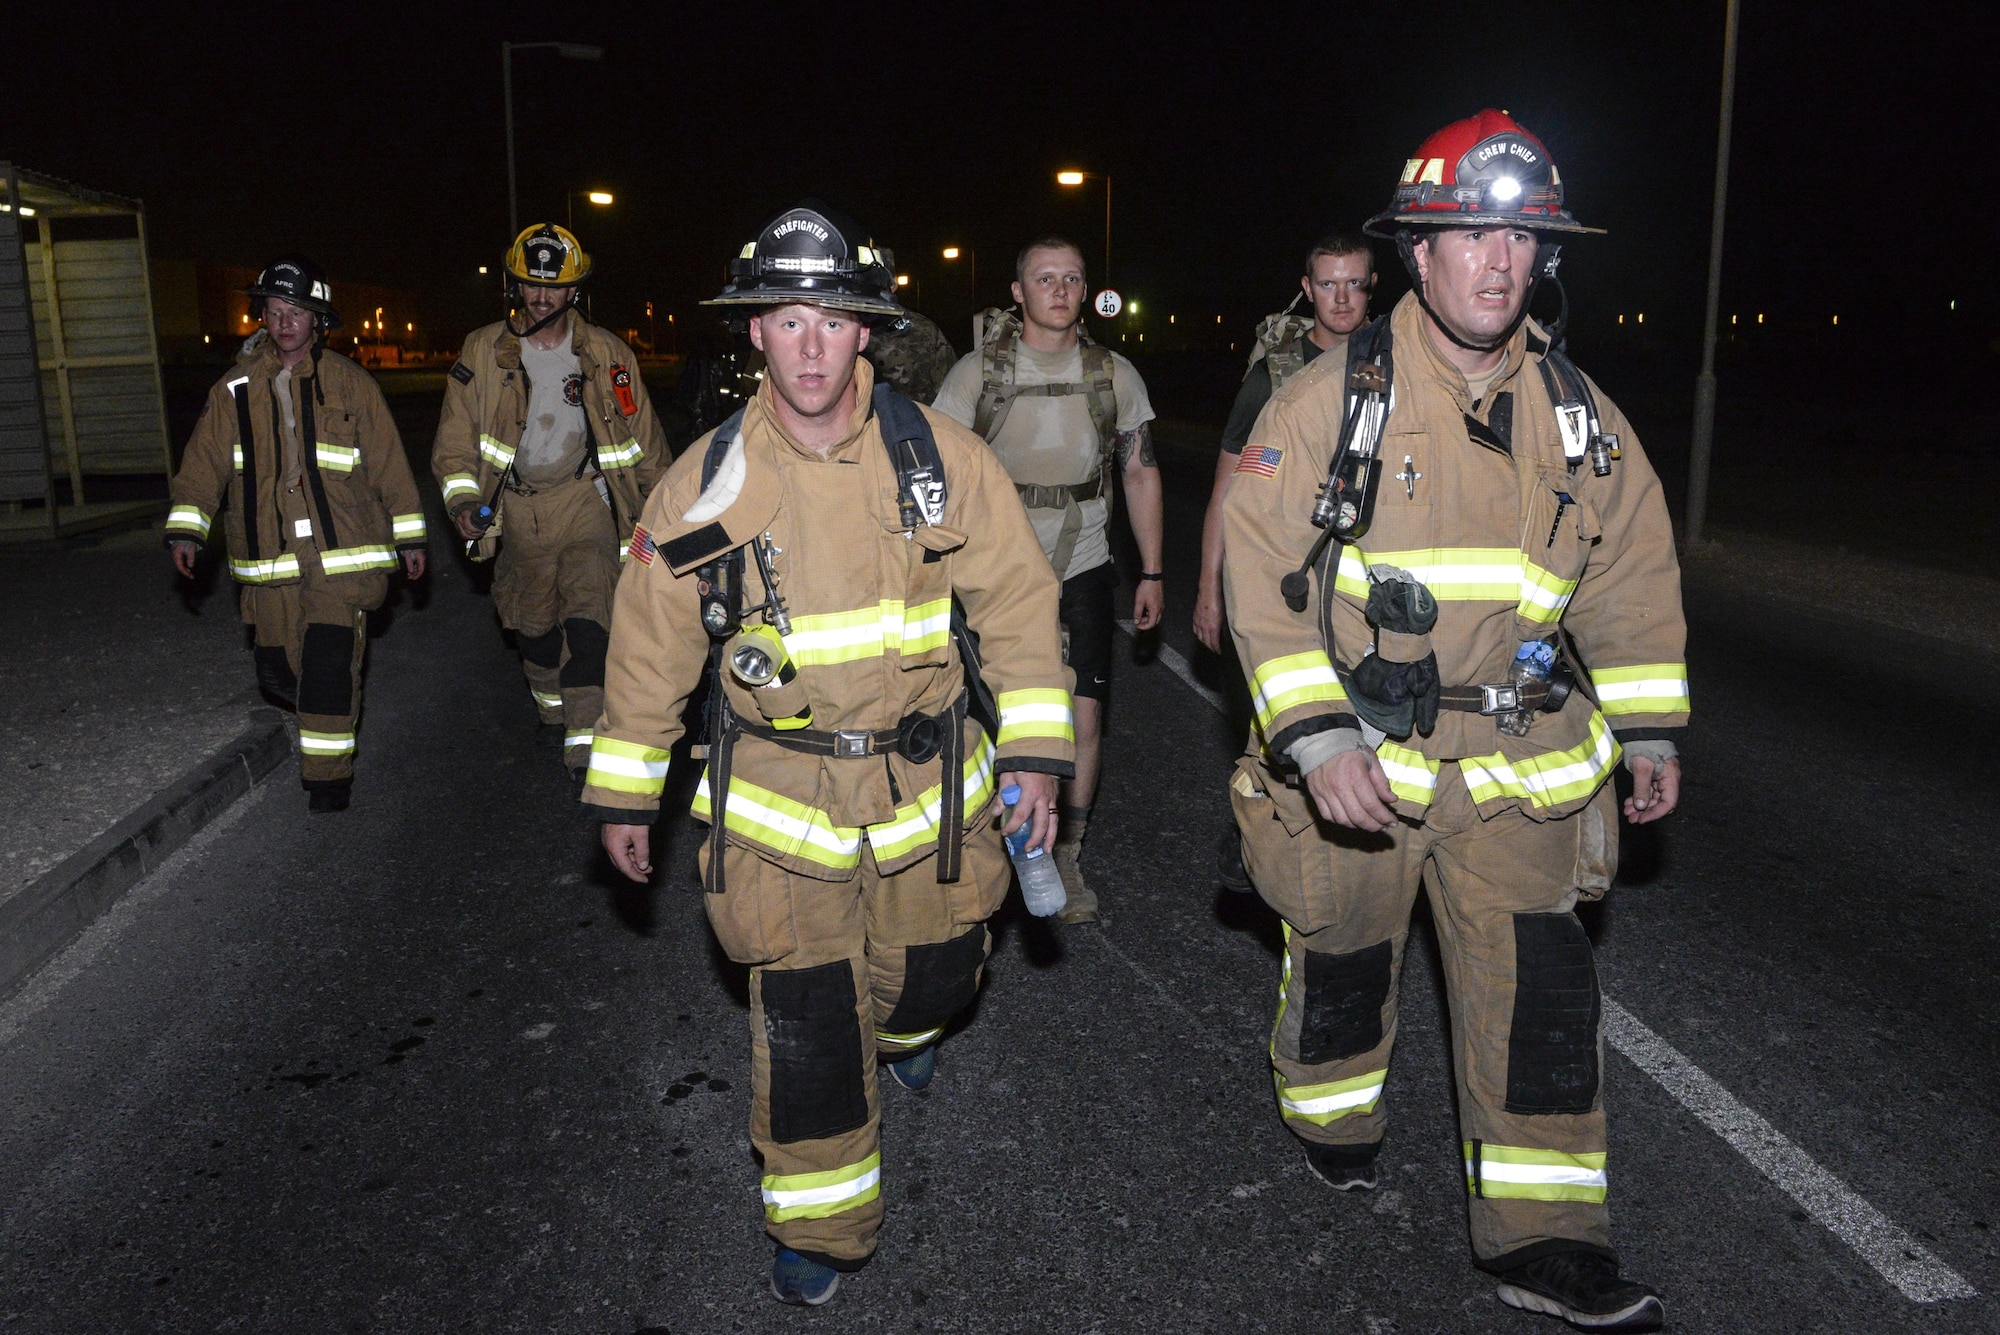 U.S. Air Force Staff Sgt. Allen Patterson, left, and Tech. Sgt. Adam Murray, firefighters assigned to the 379th Expeditionary Civil Engineering Squadron, participate in an evening 9/11 memorial walk at Al Udeid Air Base, Qatar, Sept. 11, 2017.